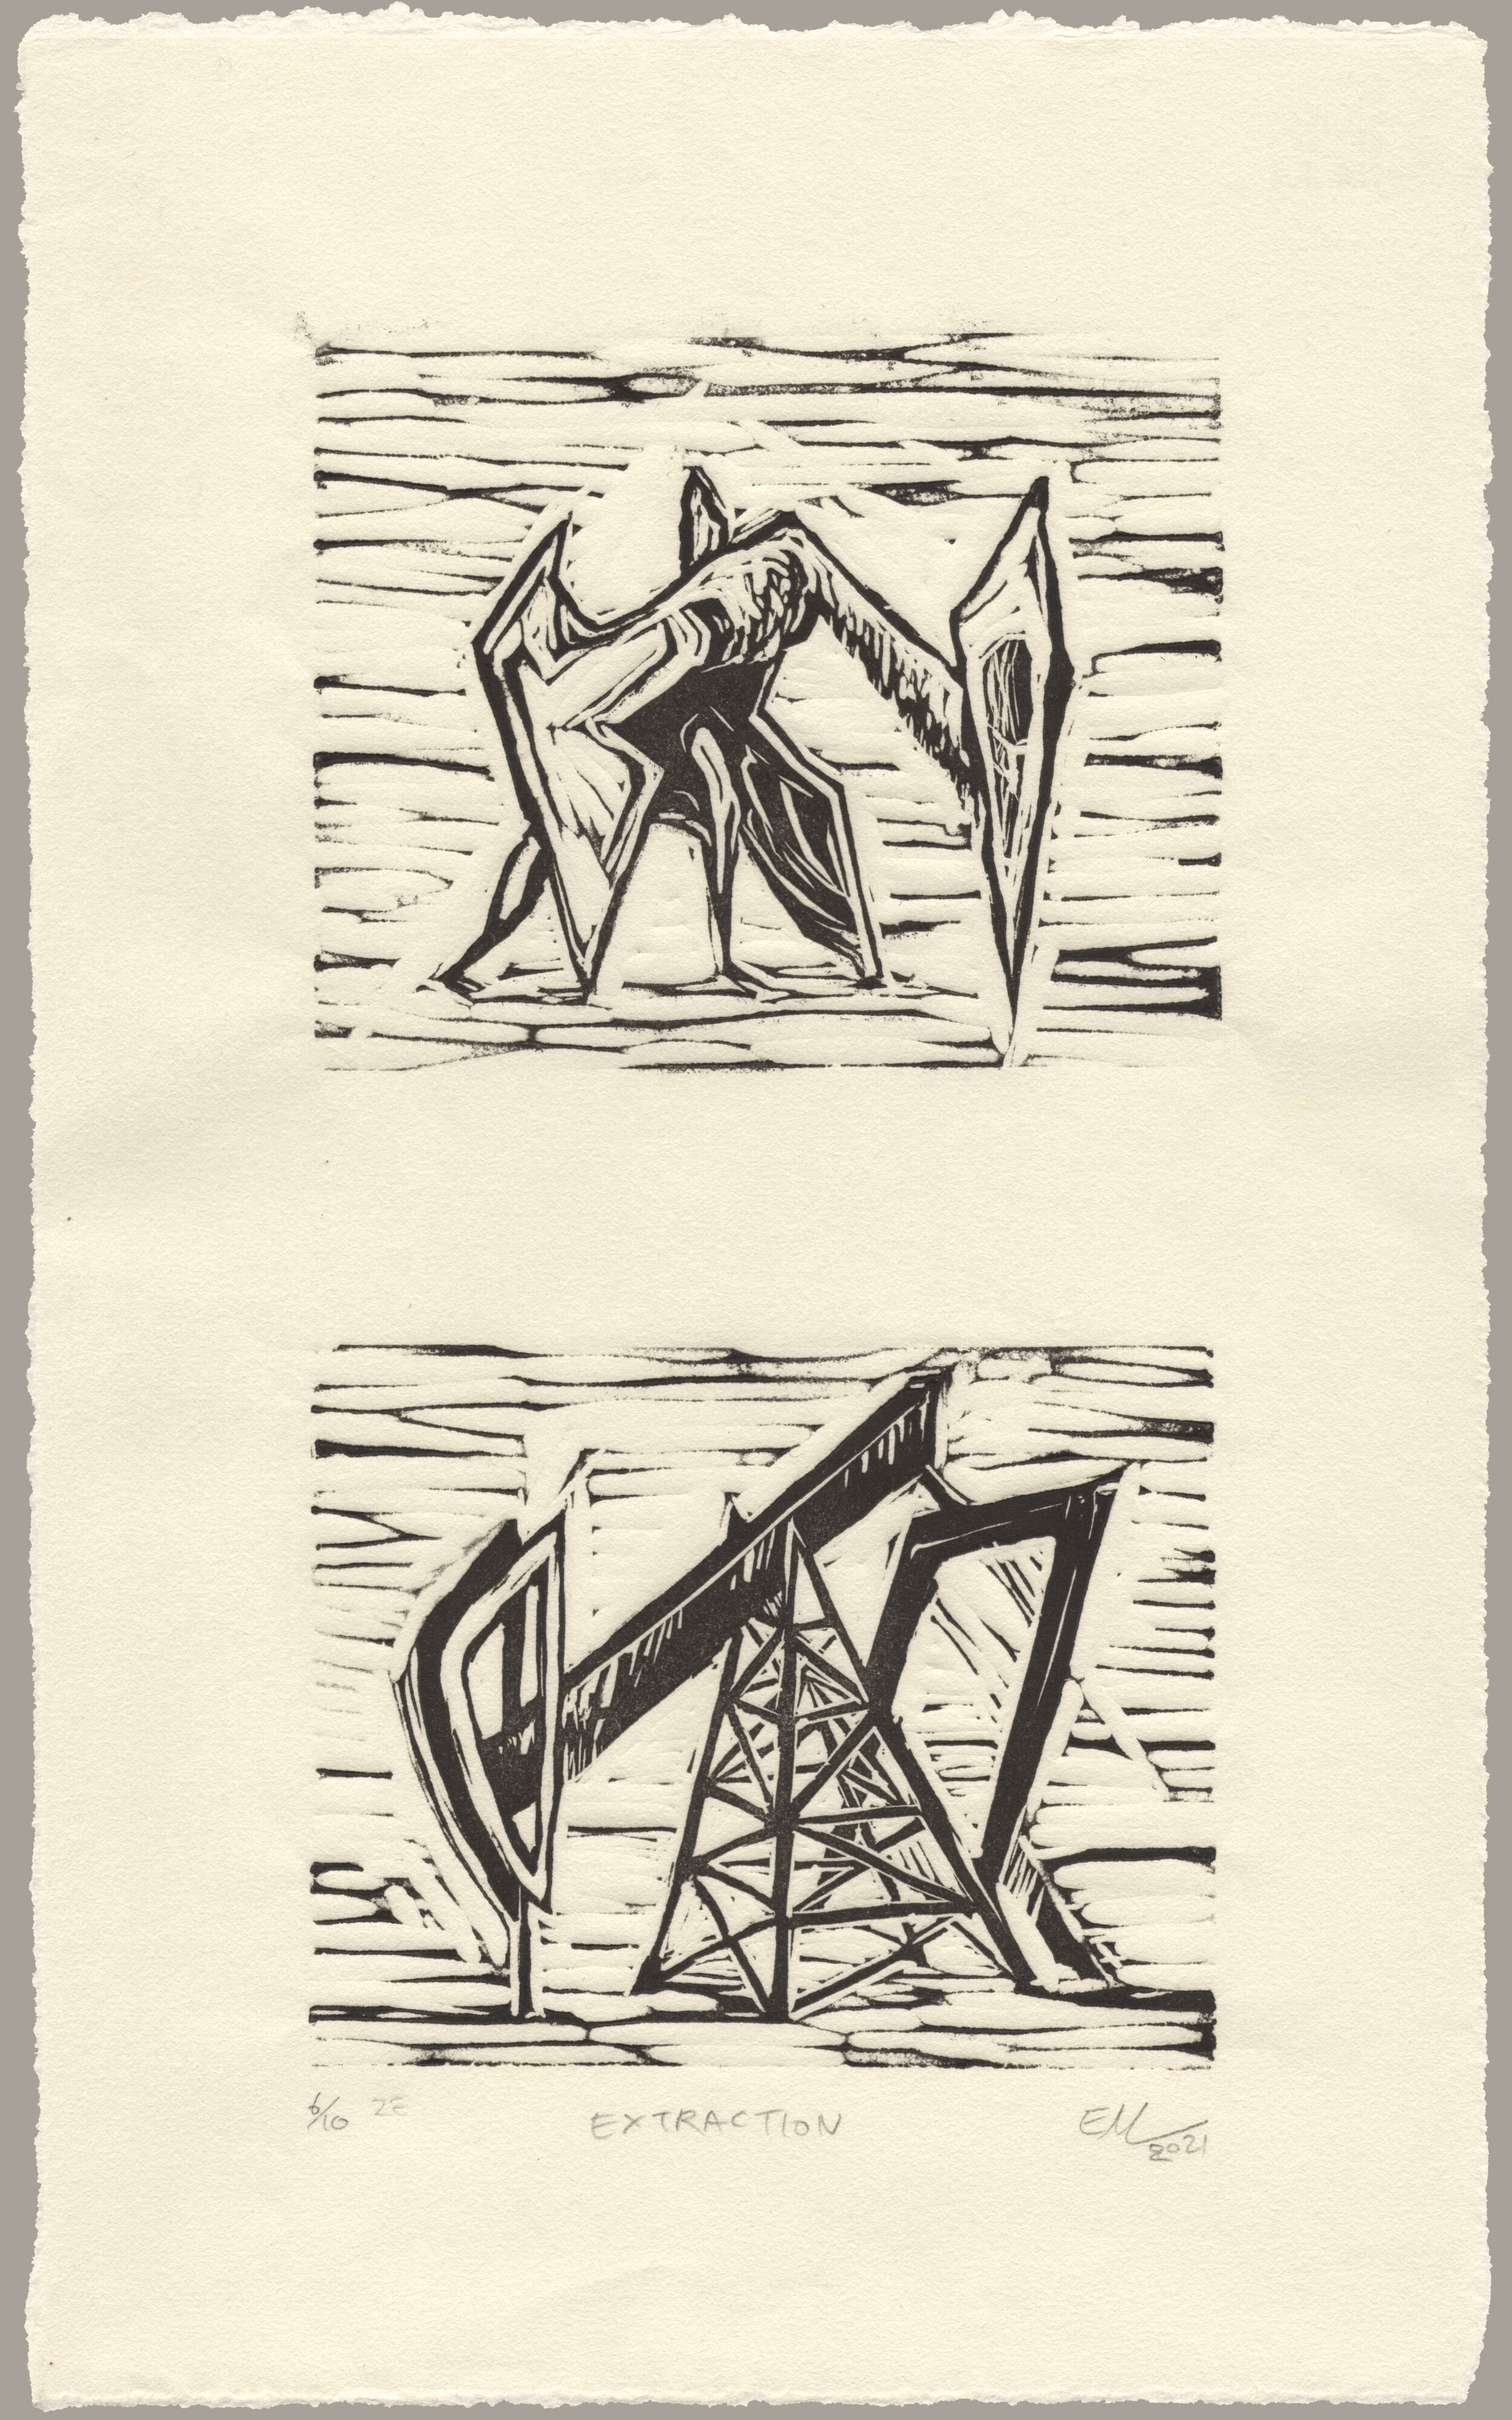 Two linocut images on delicate off-white paper: the top one is of a gaunt and skeletal pterosaur depicted in an angular style; it is standing, facing right, with its wings folded and its neck bent so that the tip of its beak rests on the ground and its pointed head crest sticks directly upwards. The lower one is of an oil pumpjack, facing left, its head low near the ground and the beam sticking up in the air. The two images are like mirrors of each other in their style and pose. The print is signed: '6 of 10, Second Edition, Extraction, EM 2021'